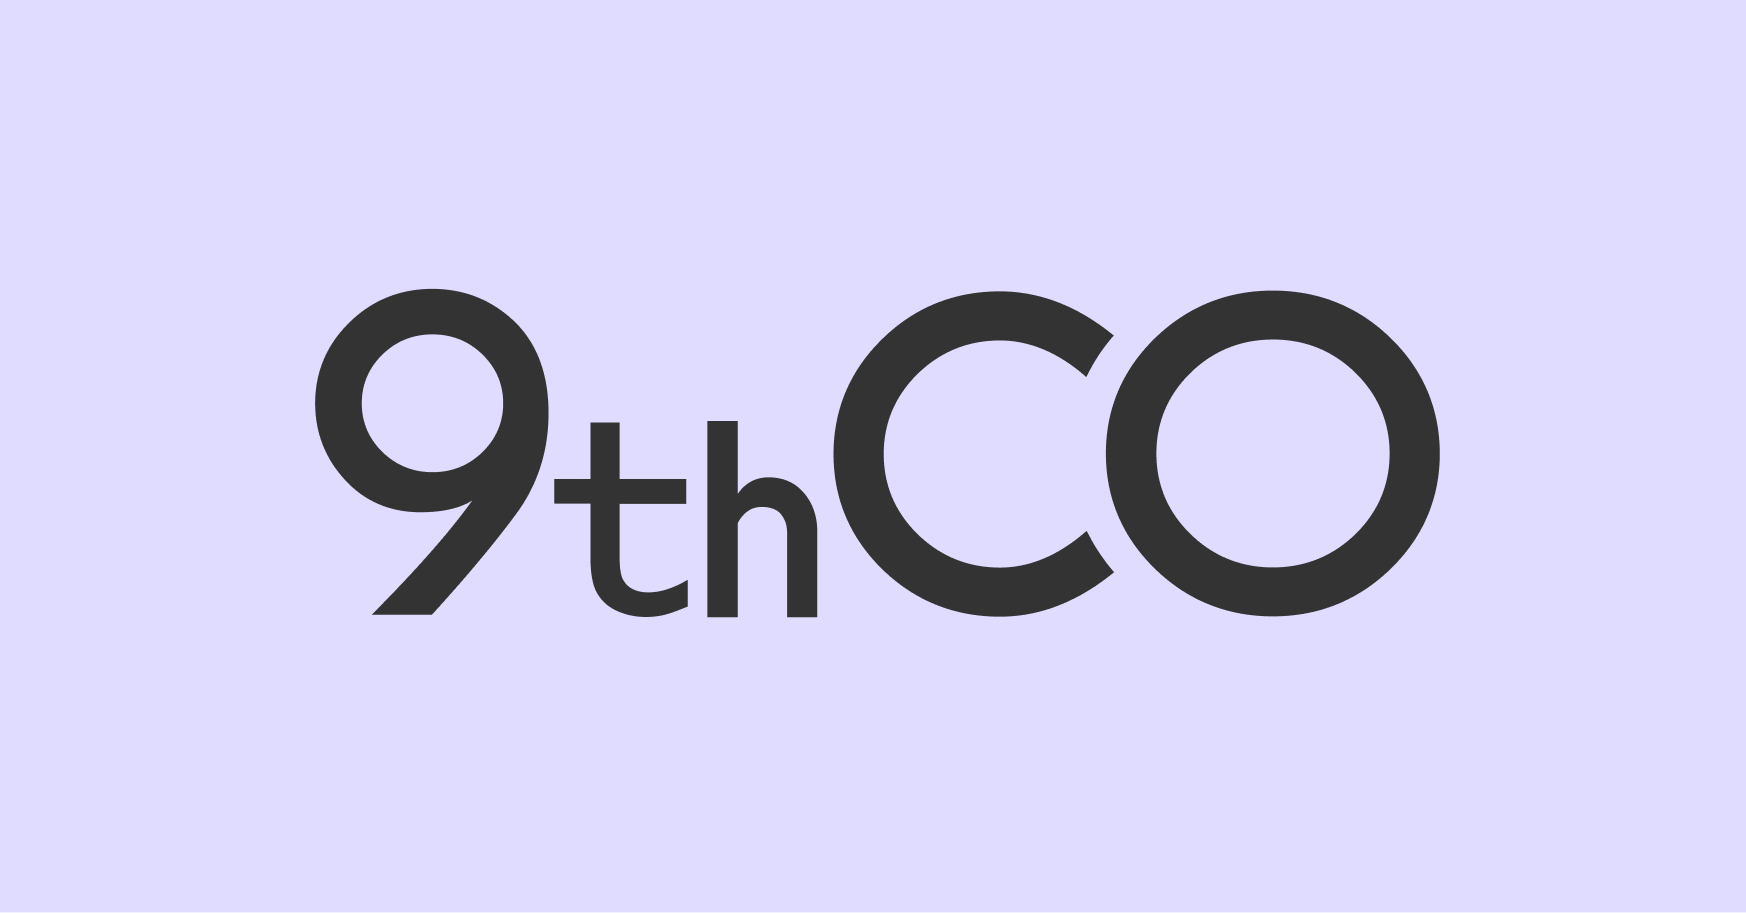 Agency 9thCo logo with background